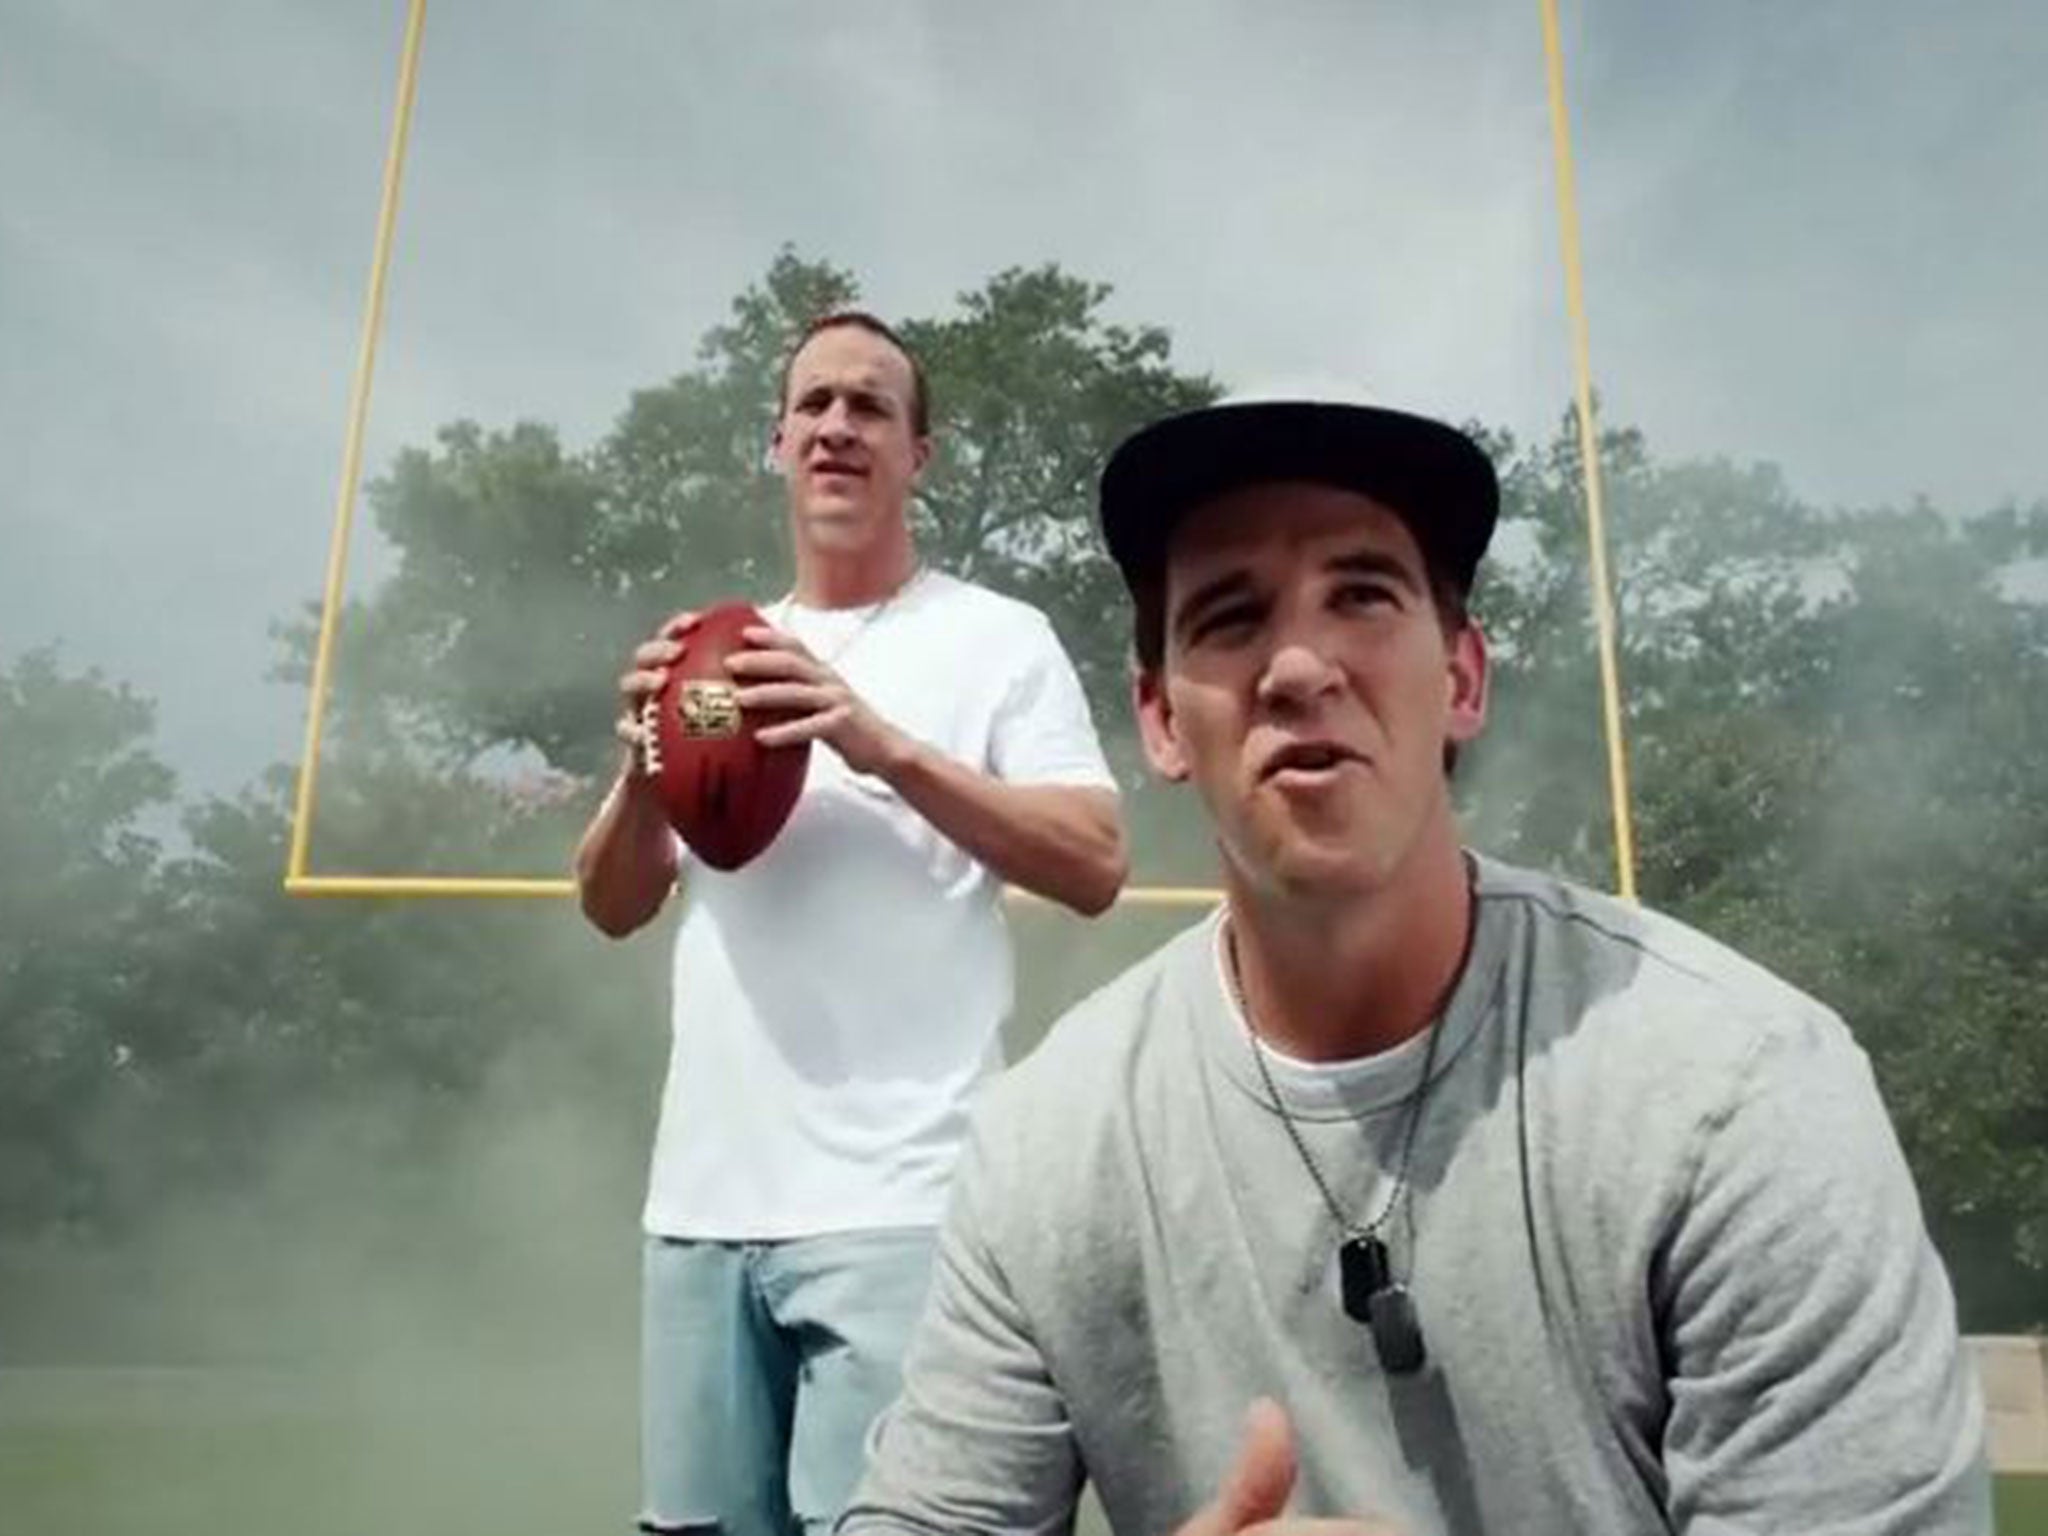 NFL quarterback siblings Peyton and Eli Manning have released a hilarious new rap music video.